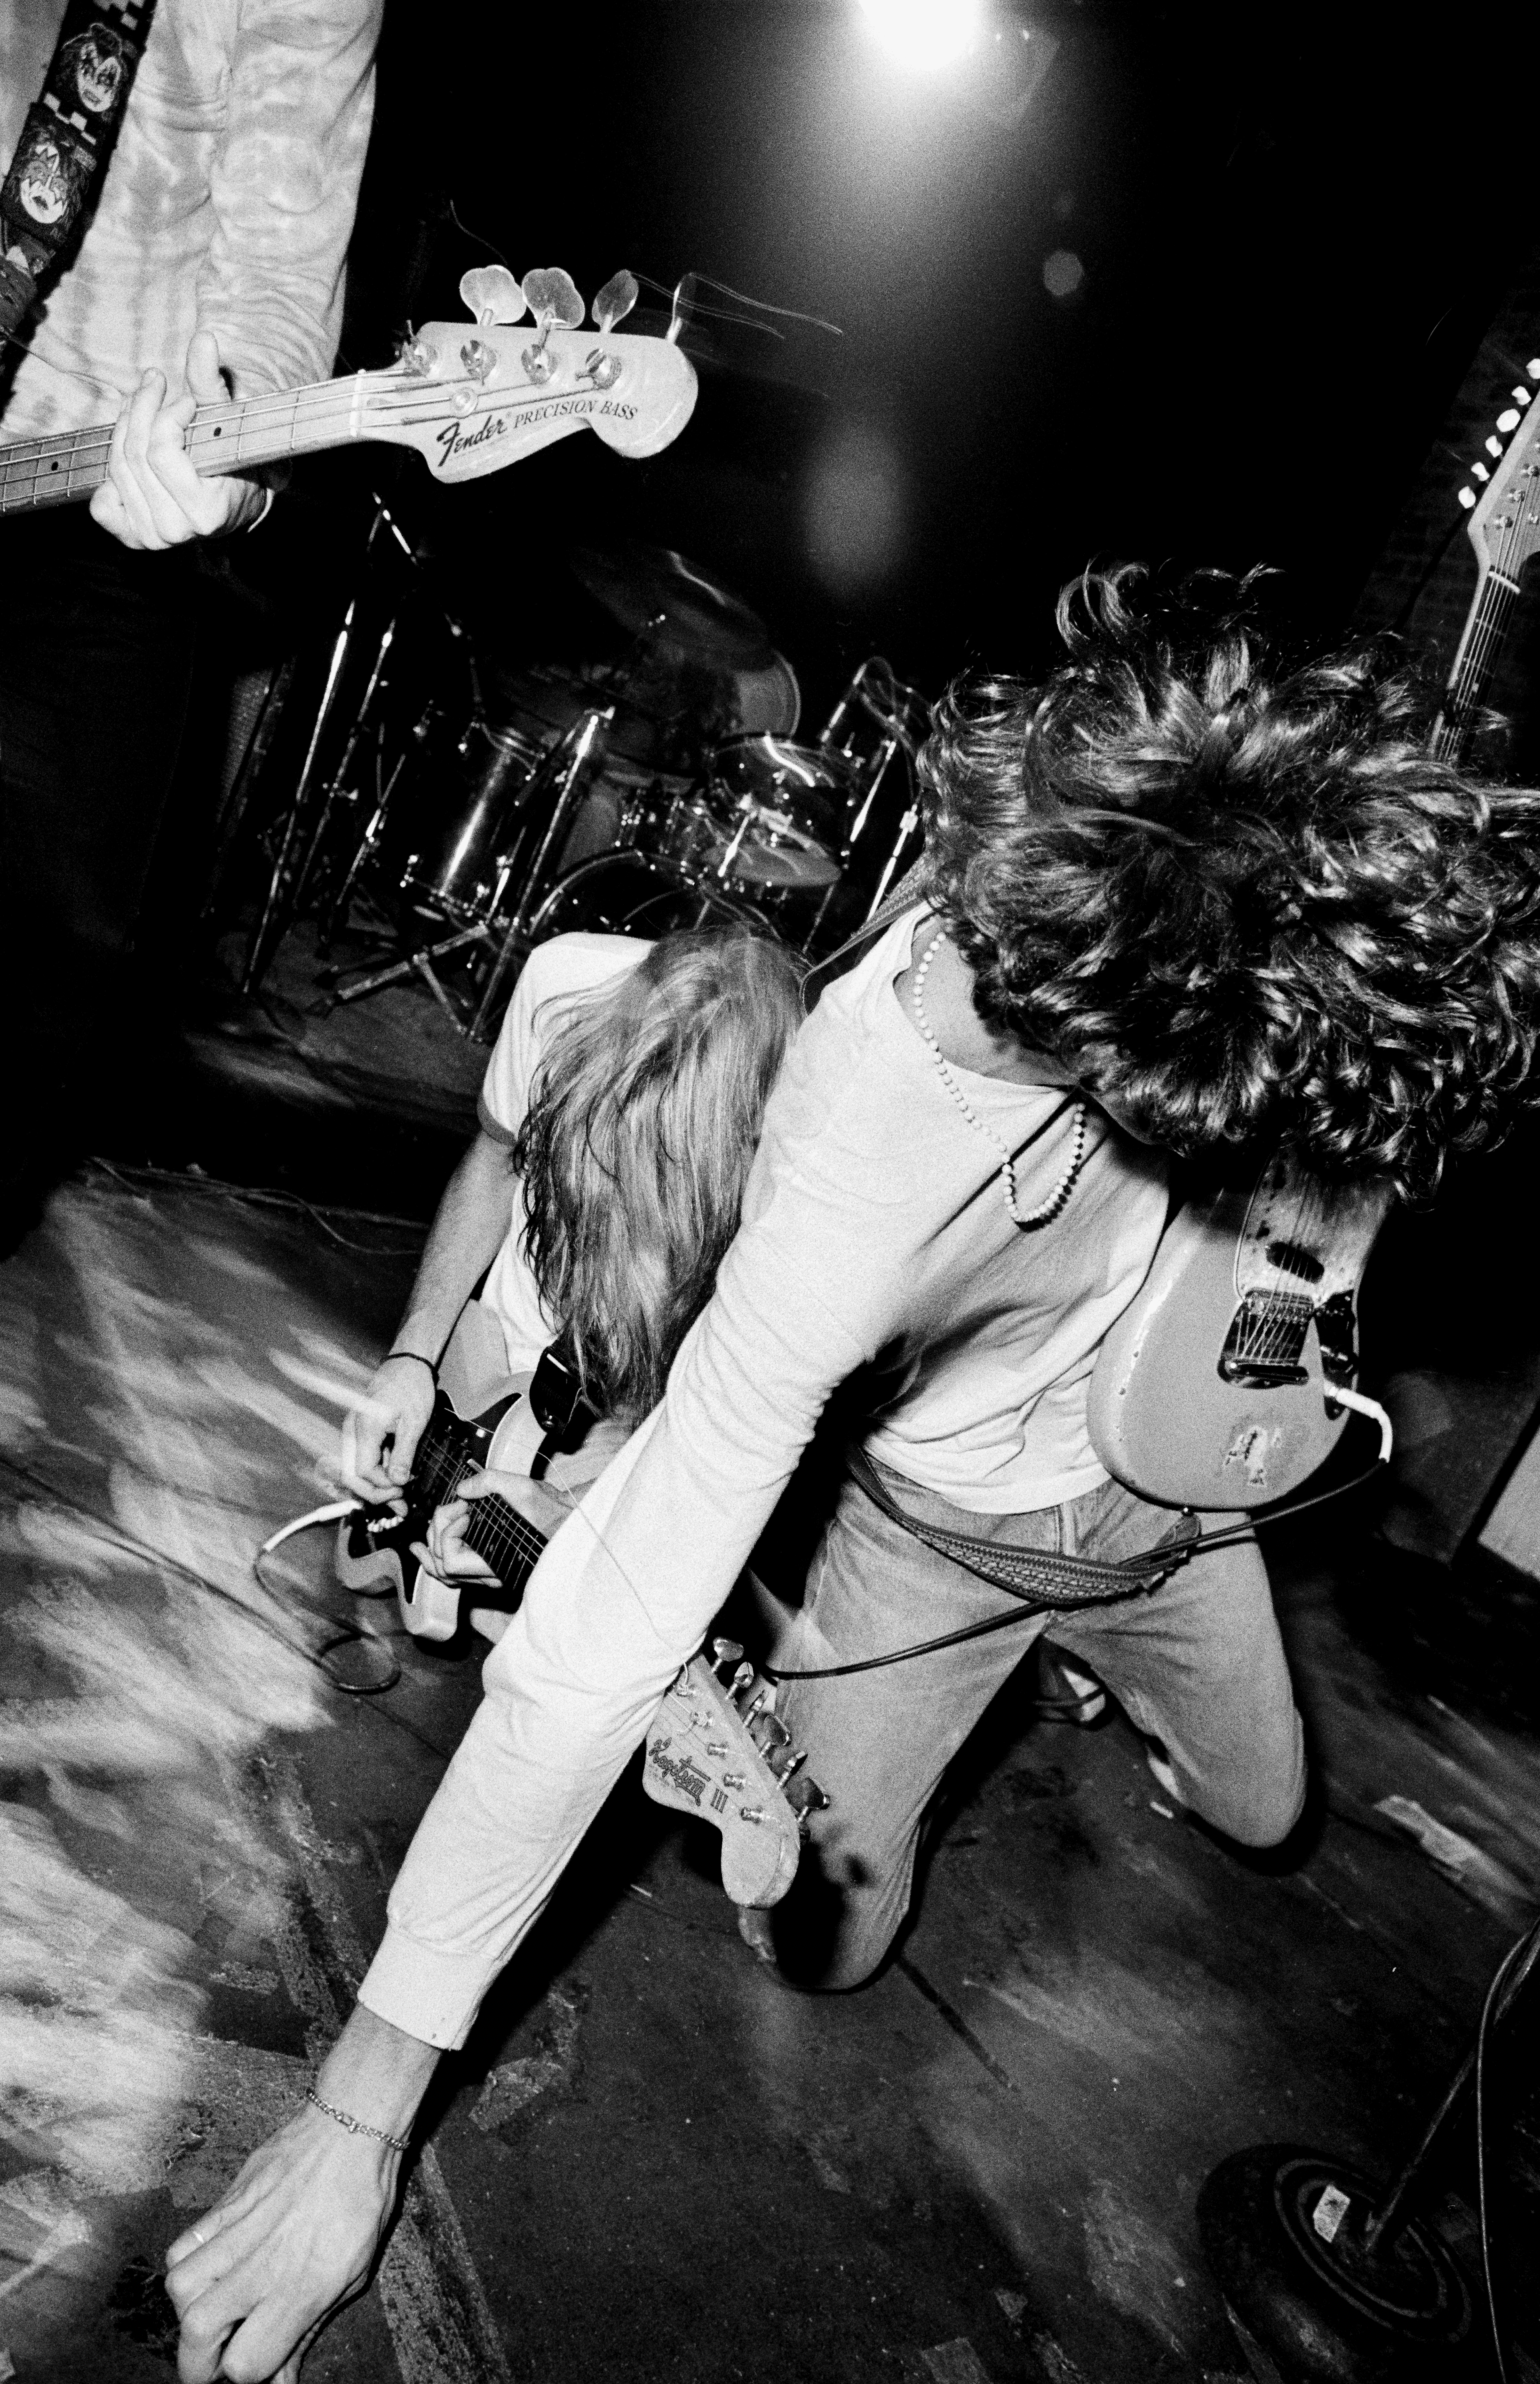 Mudhoney: The Central Tavern, Seattle, 1988